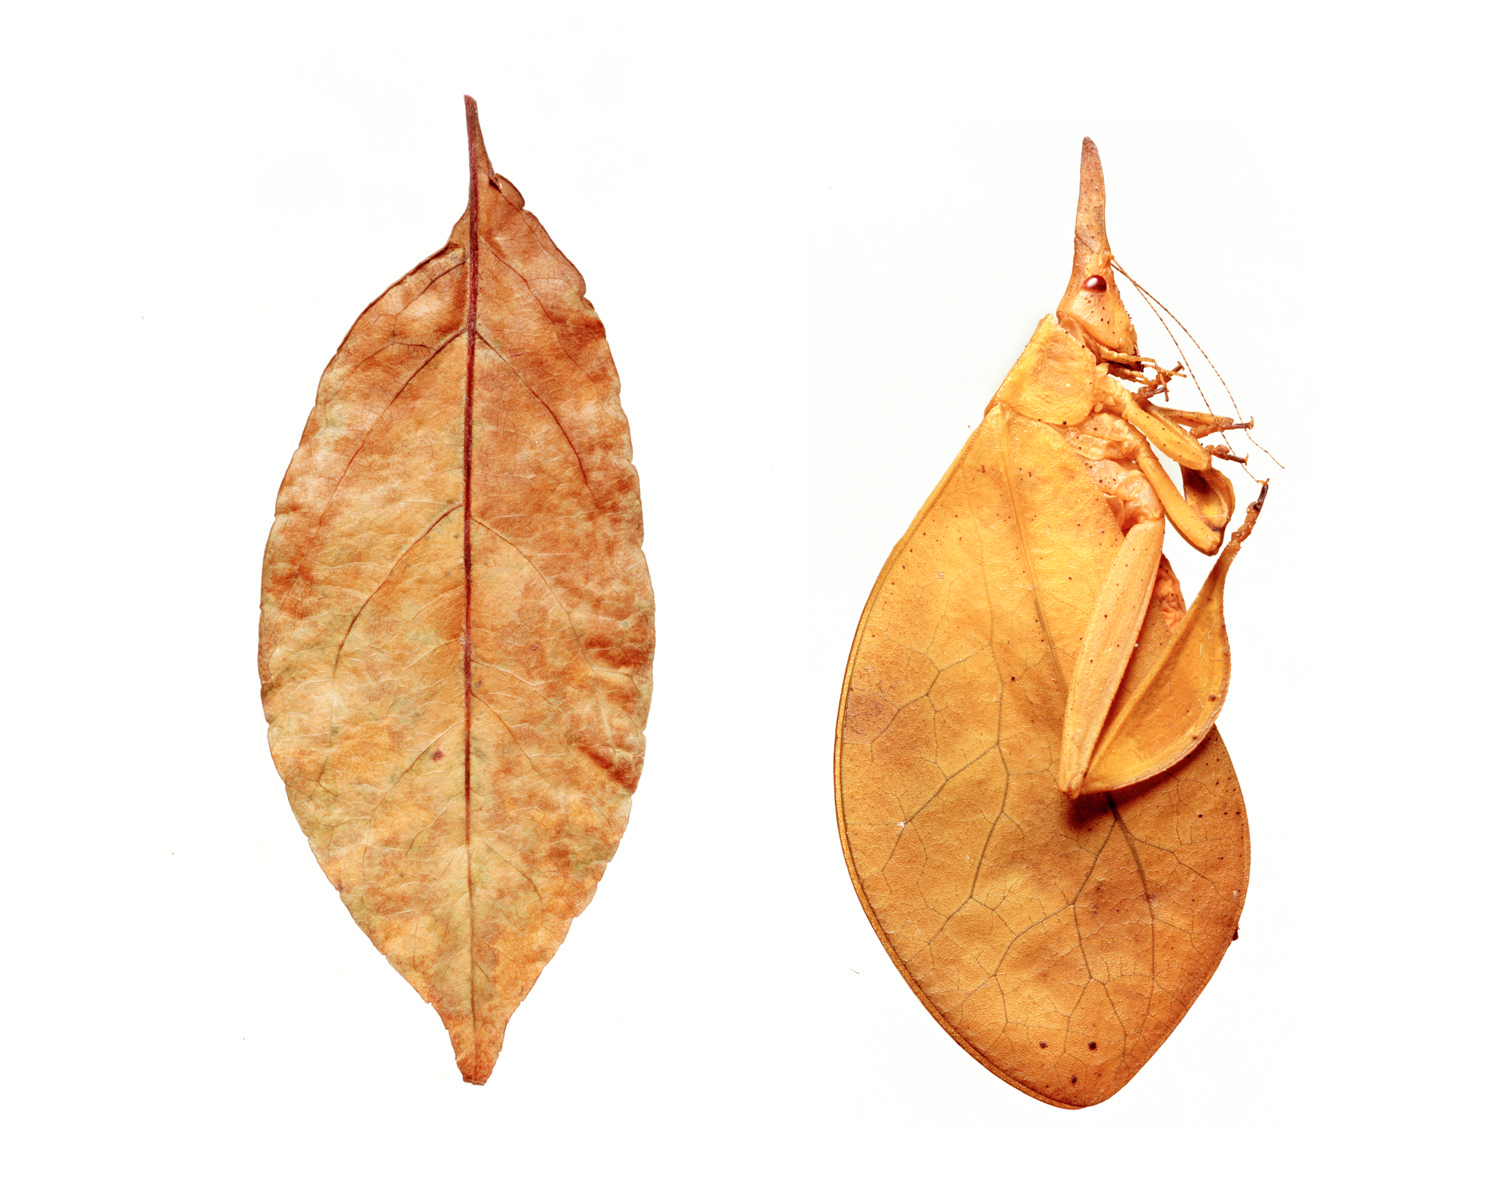     Sandy Nicholson, leaf and leaf insect, from the mimic series, 2006
